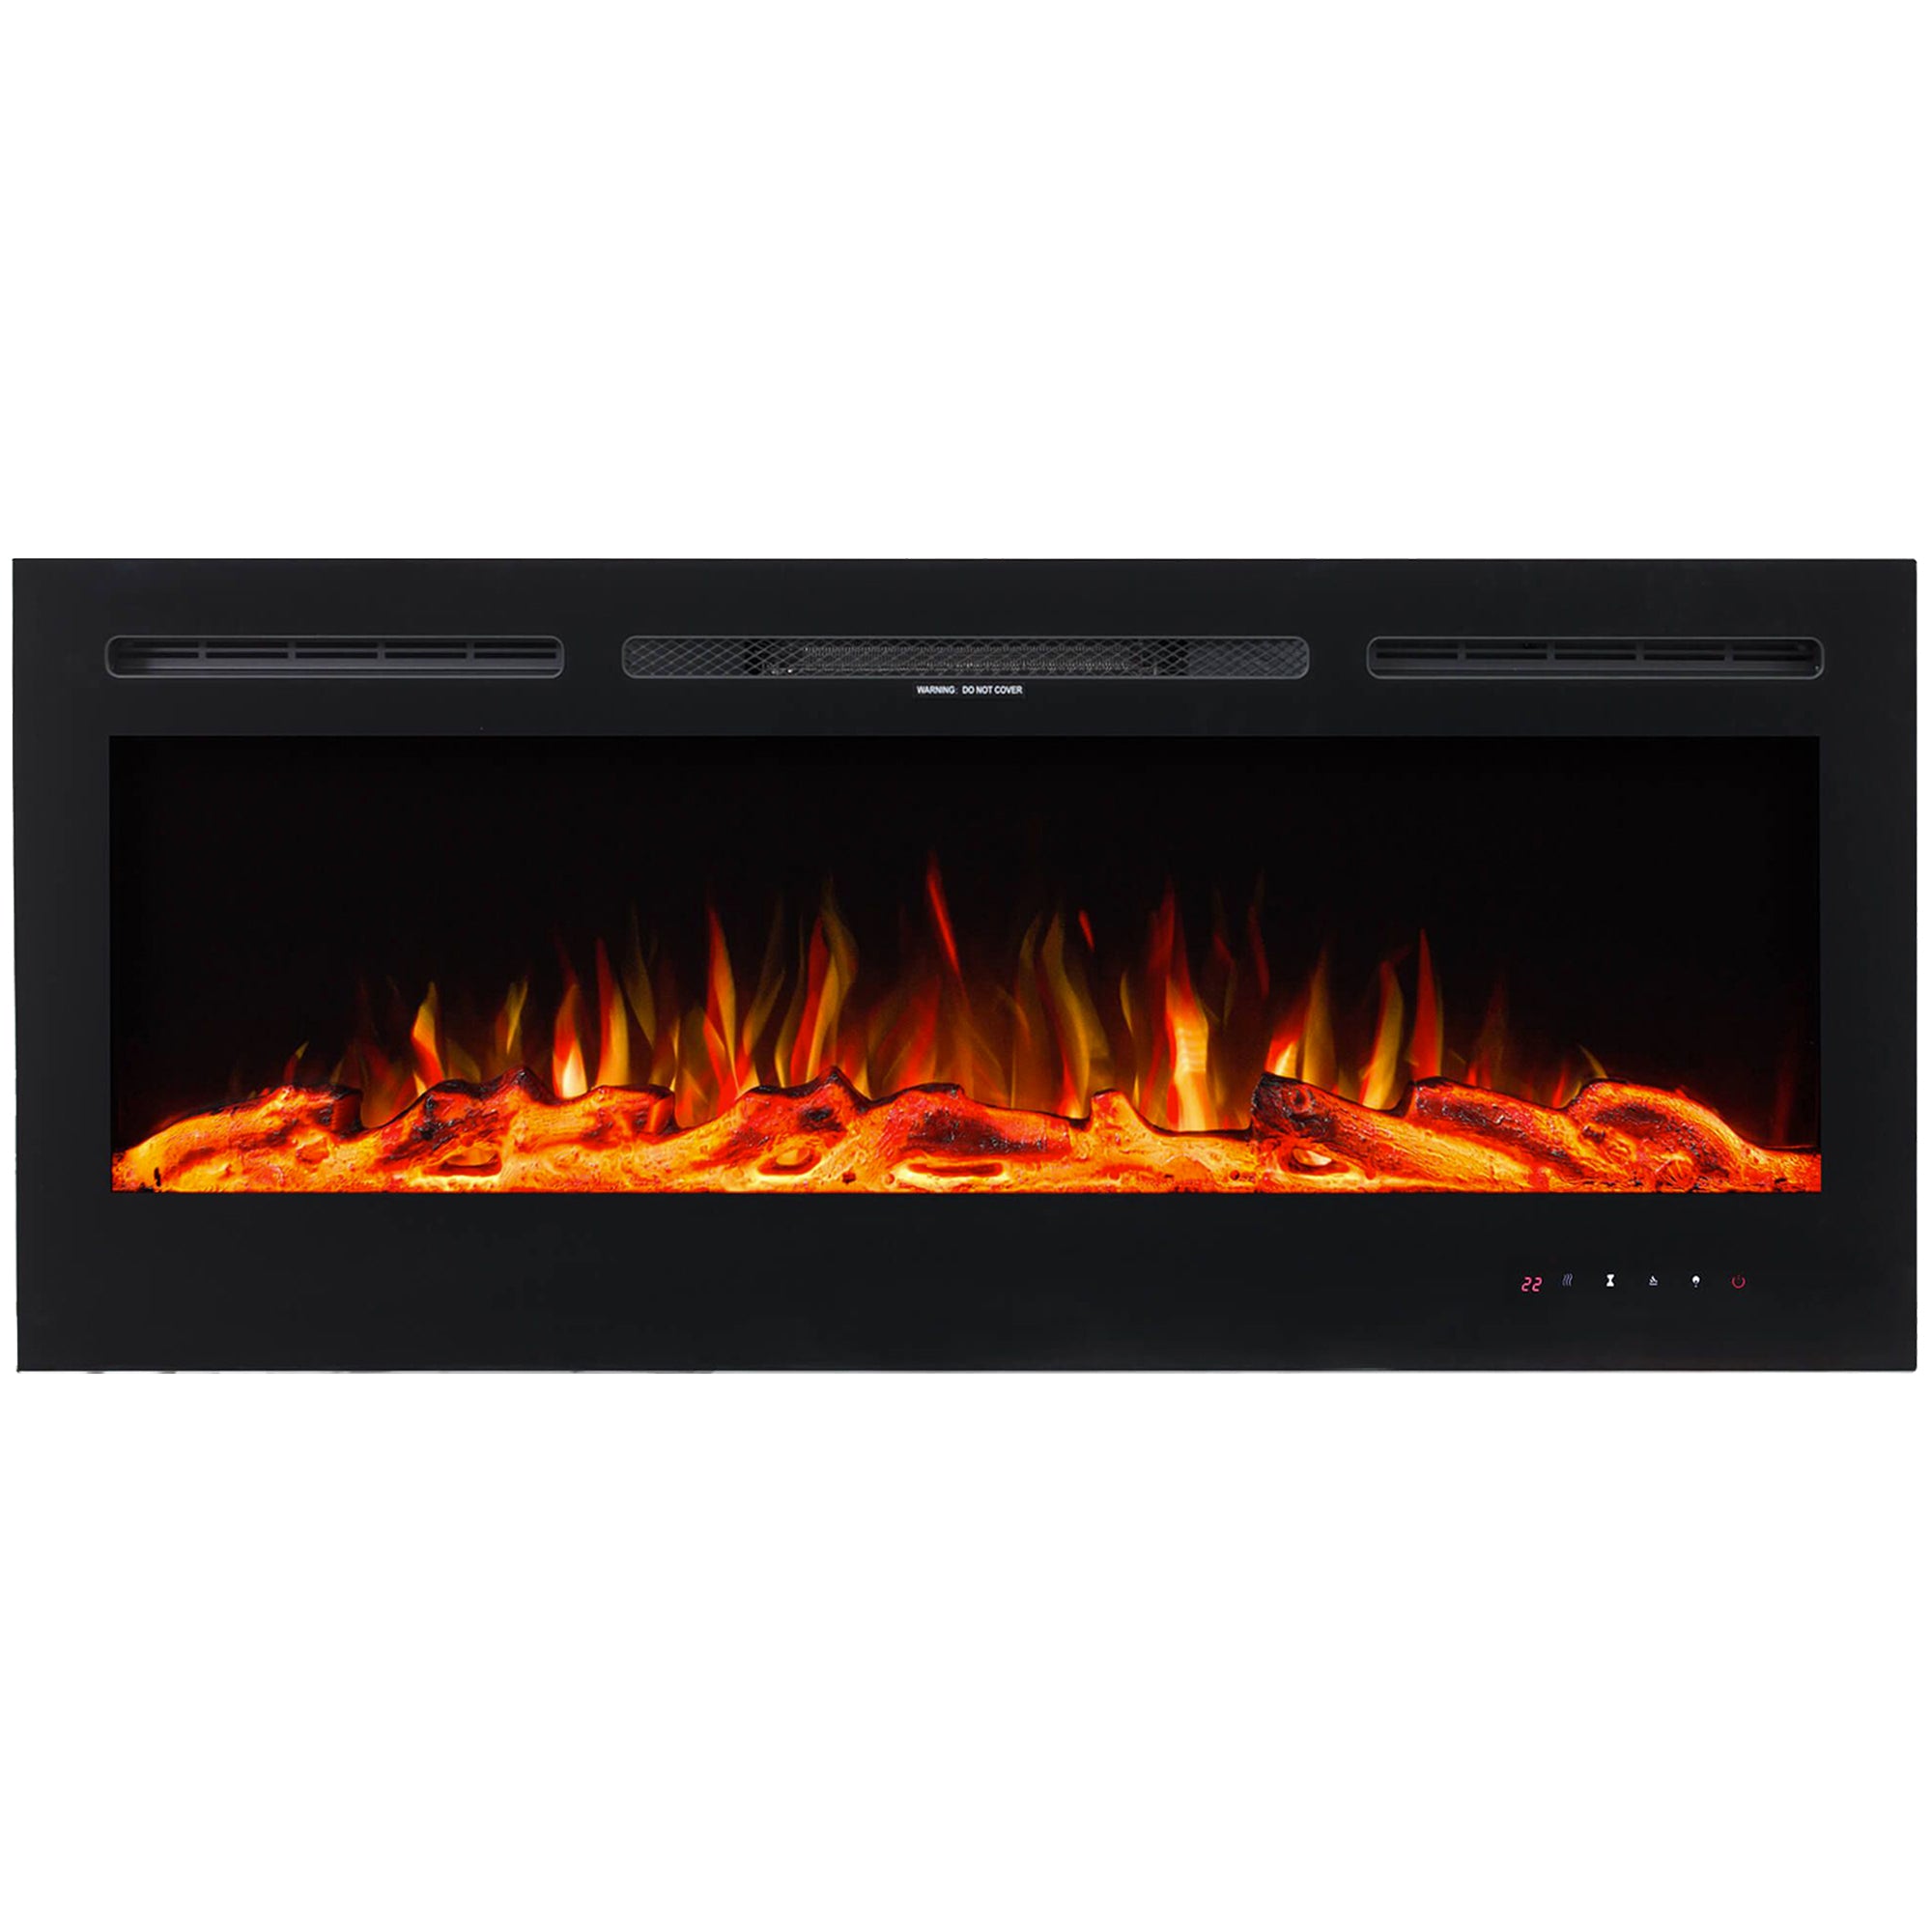 40" Glass Panel Electric Fireplace with Colourful Flame effect